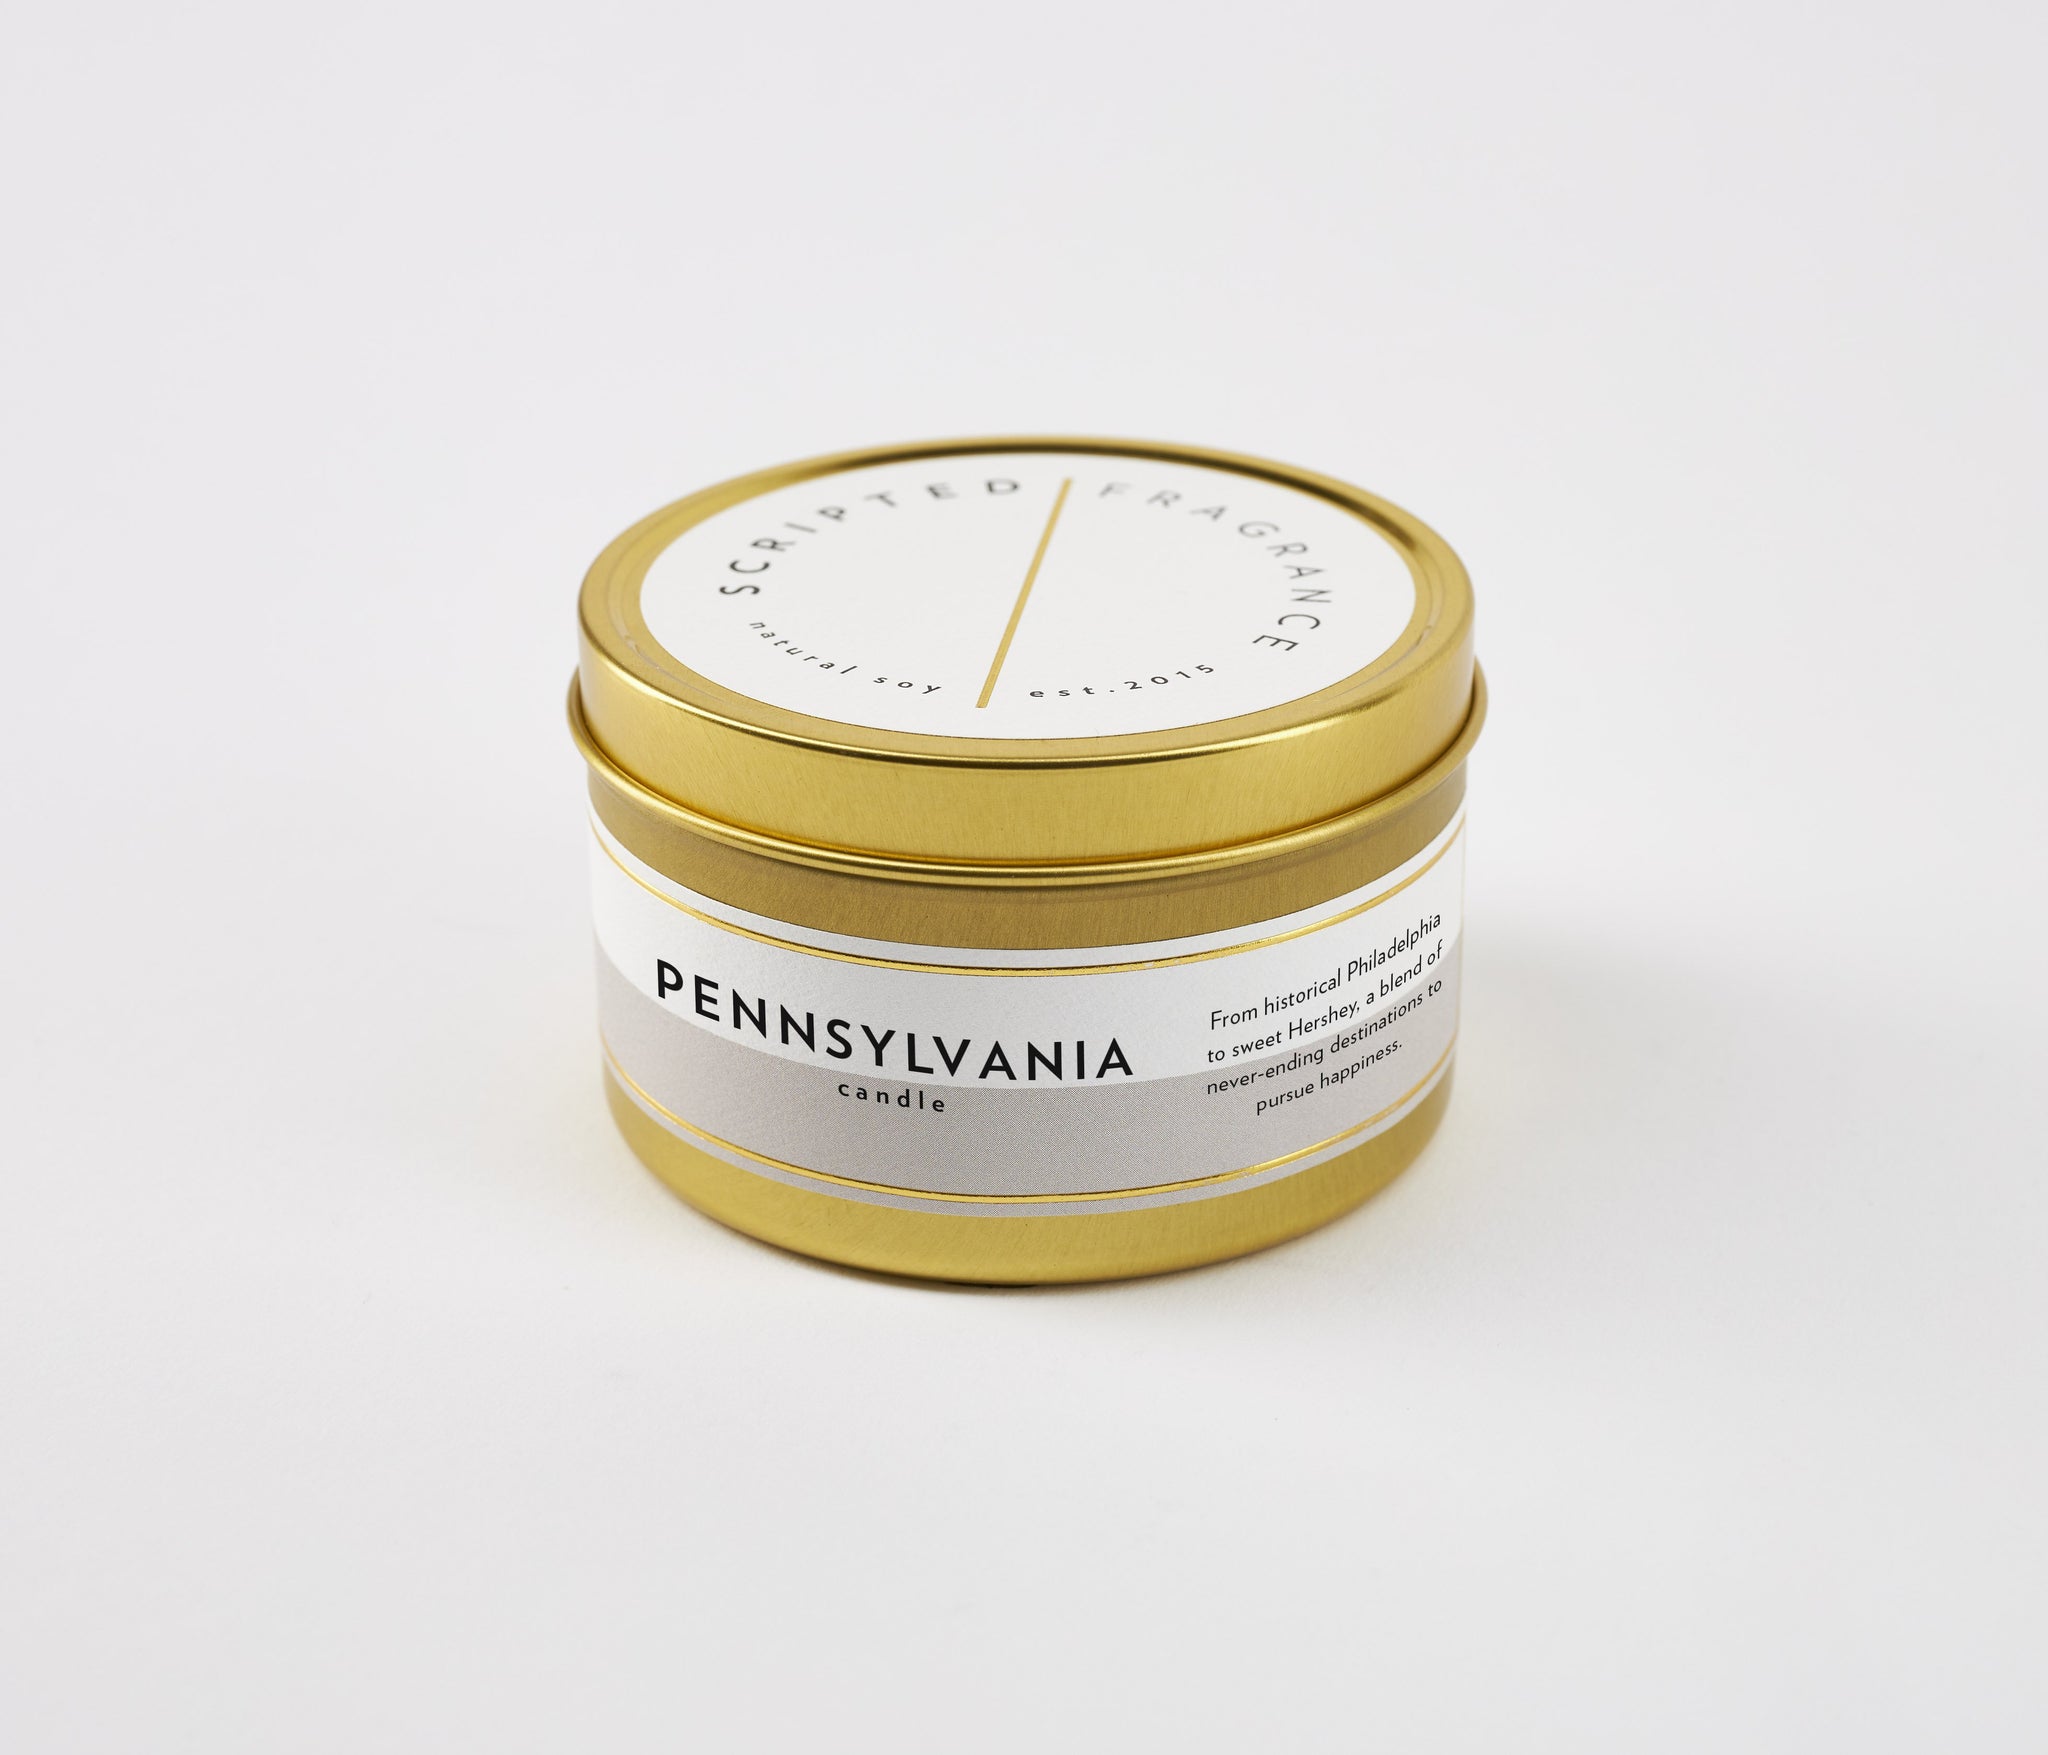 Pennsylvania State Soy Candle